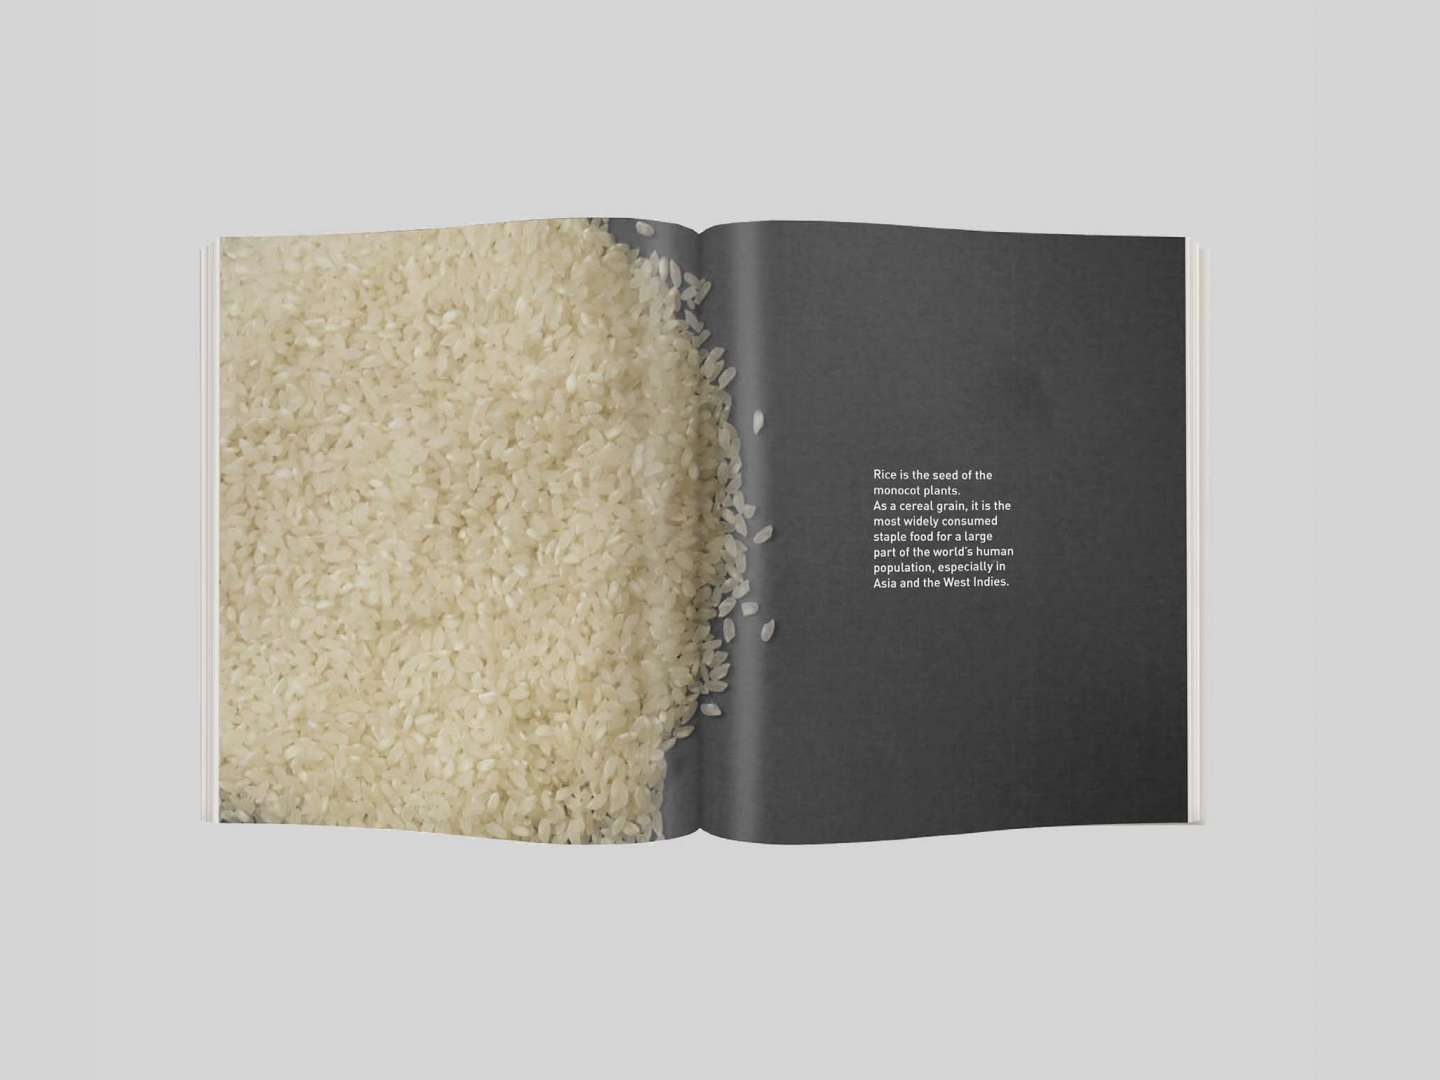 Paper Book : All about Rice